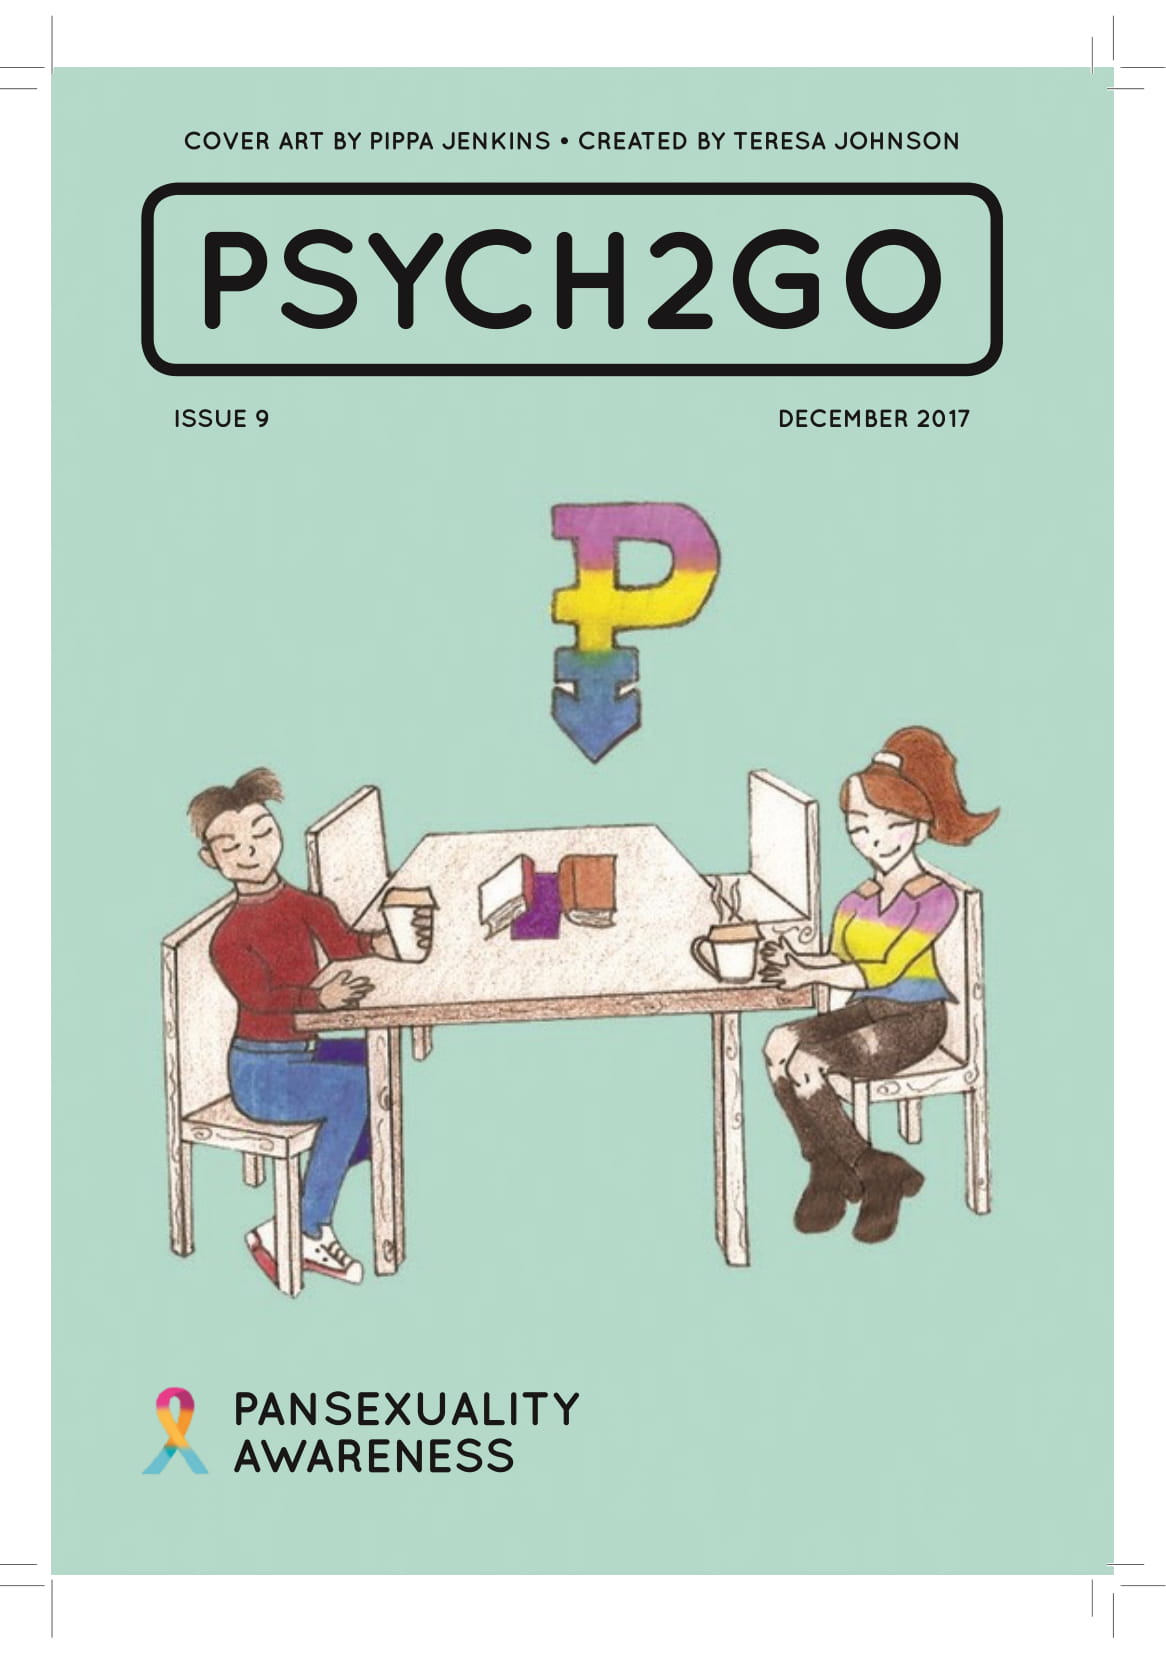 Psych2Go Magazine #9 - Poster (Pansexuality Awareness)